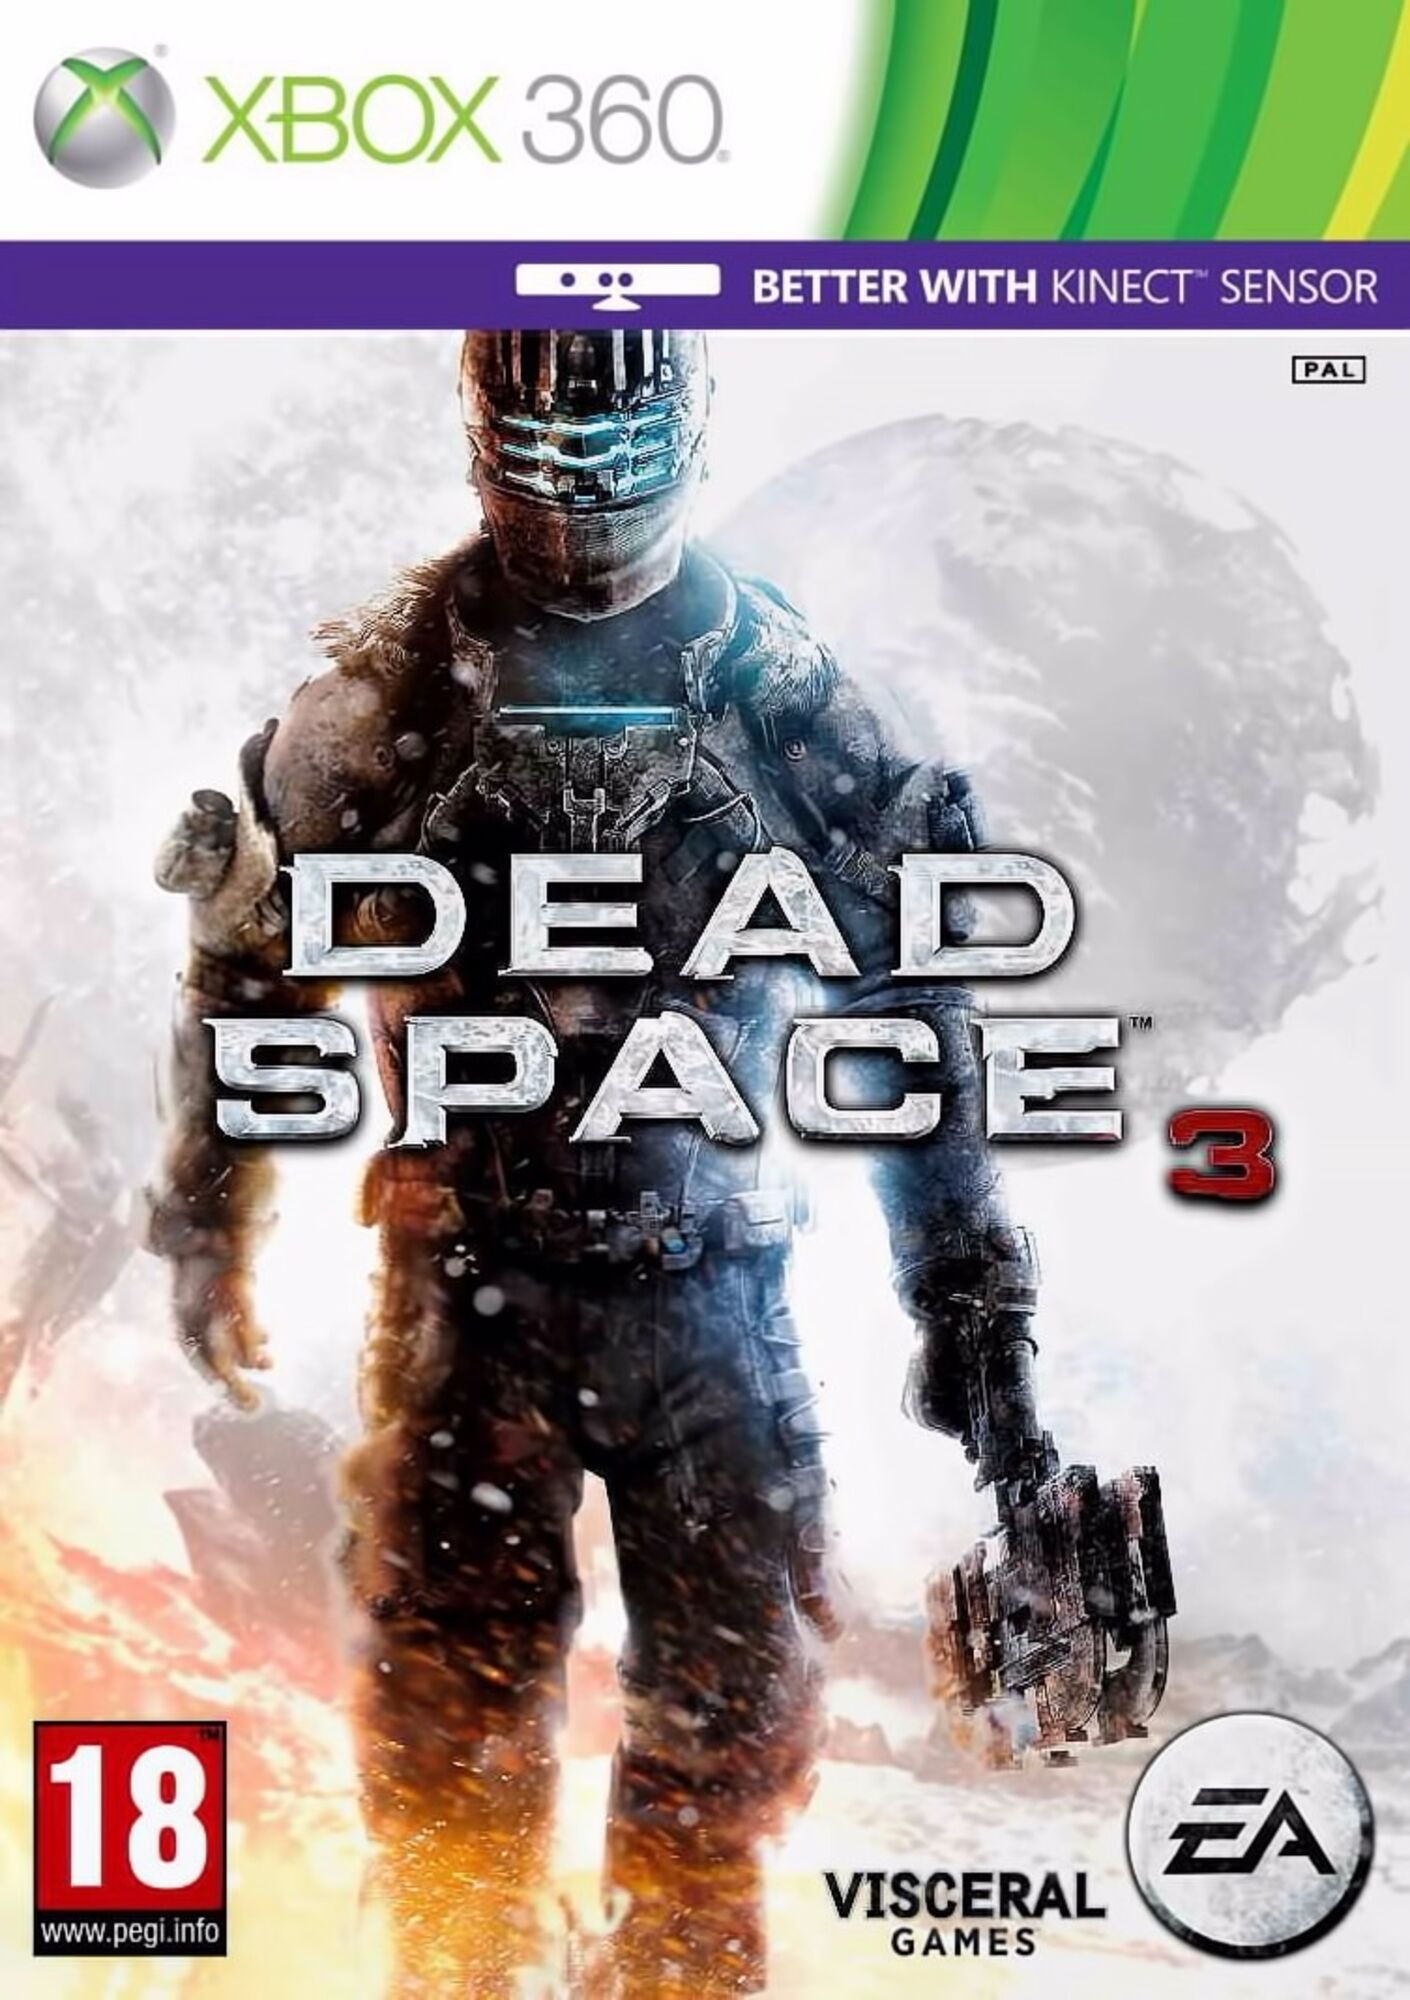 can do coop in dead space 3 on xbox one